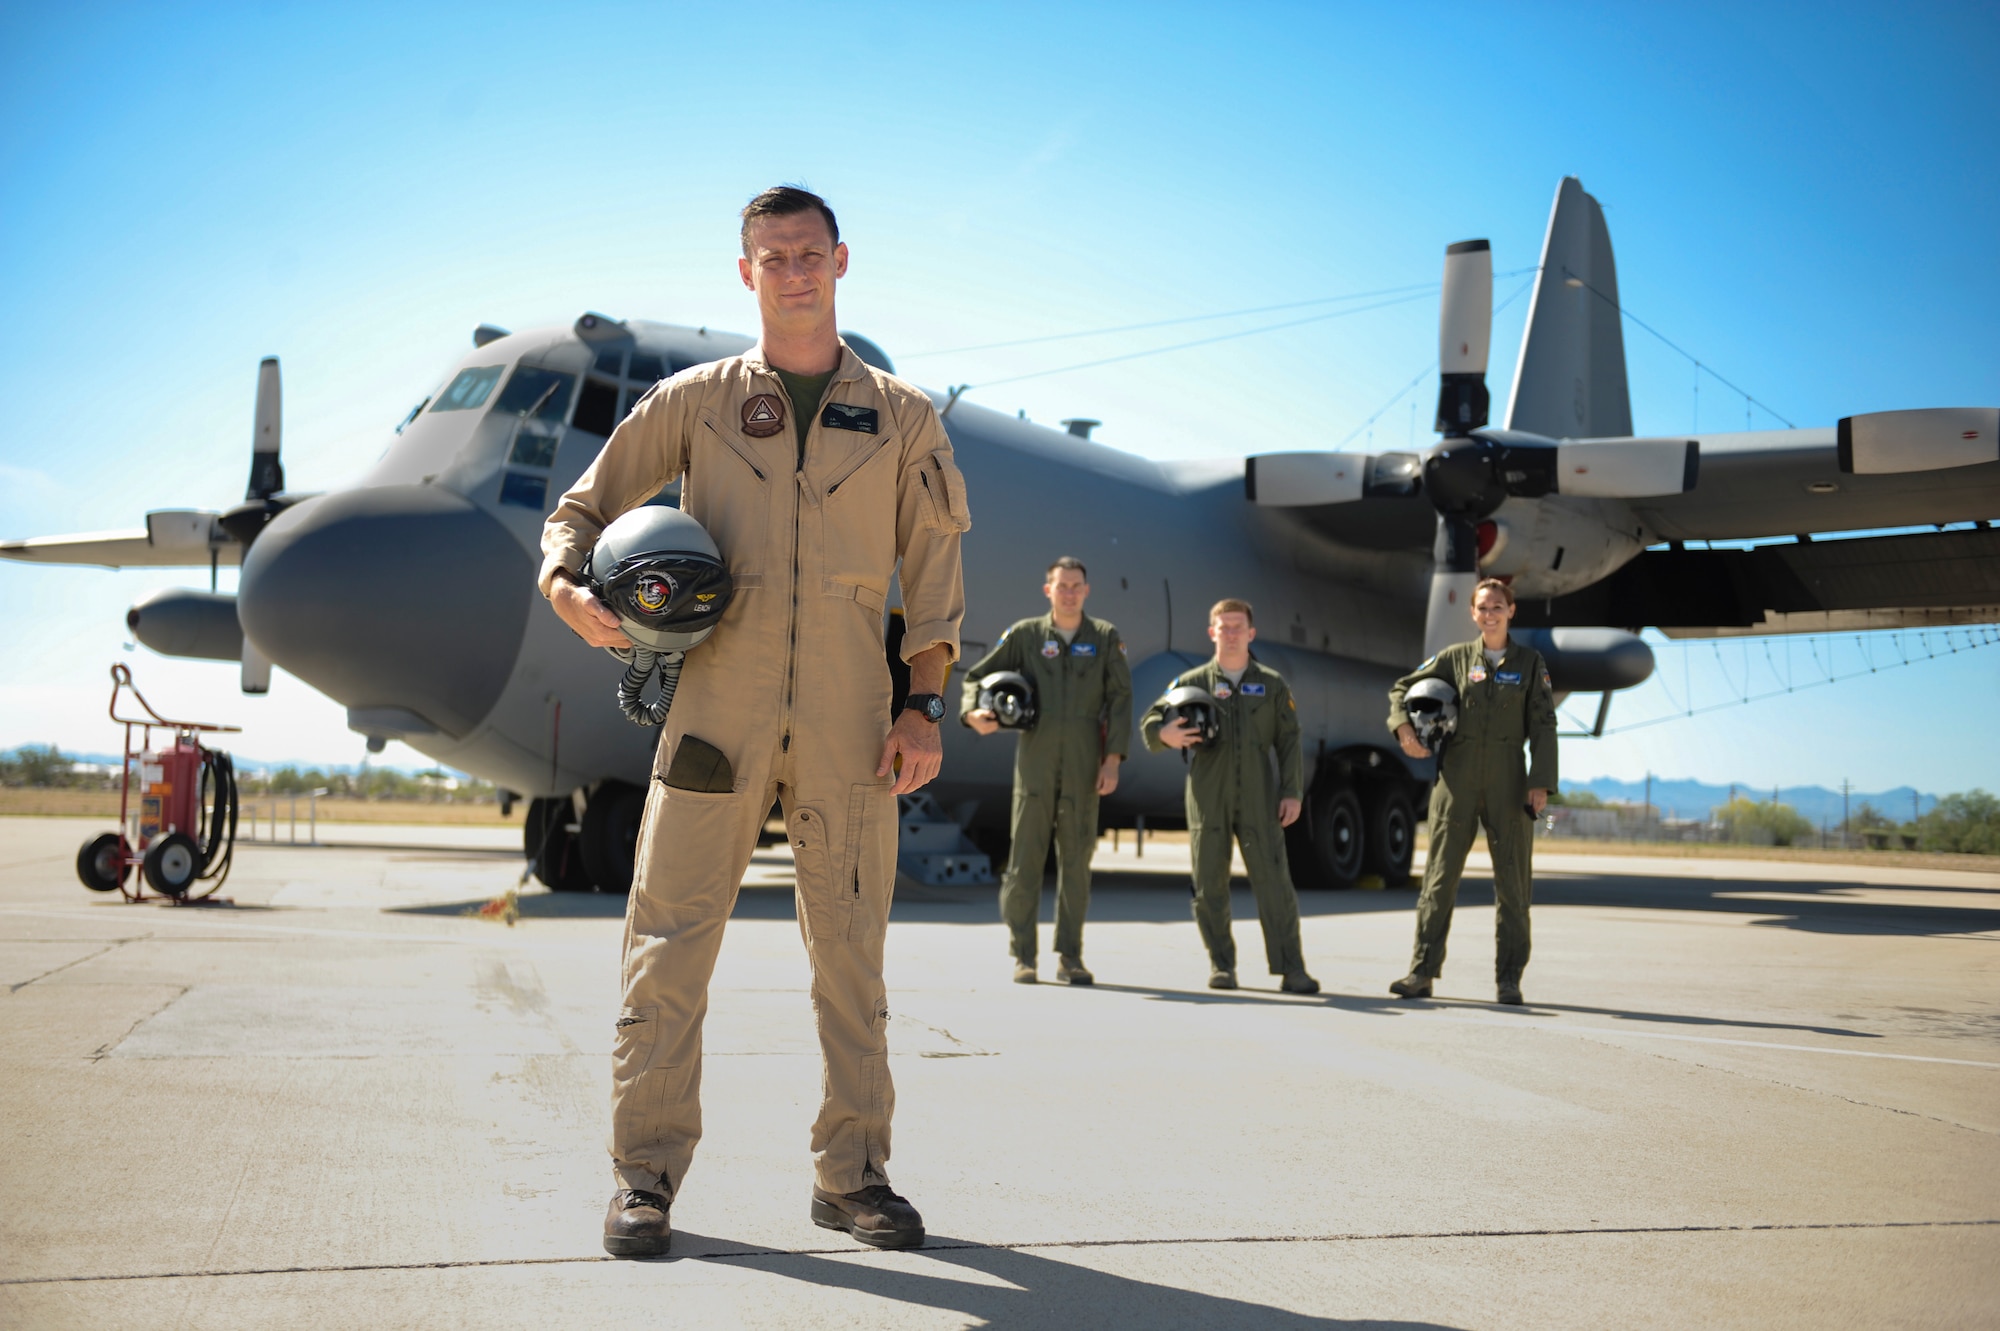 Marine Corps Capt. Jonathon Leach, a 41st Electronic Combat Squadron mission crew commander, stands with Air Force EC-130H Compass Call crewmembers on the flightline at Davis-Monthan Air Force Base, Ariz., July 31, 2015. He is part of a three-year interservice exchange program flying with Airmen from the 41st ECS. Leach is from Marine Corps Air Station Cherry Point, N.C. (U.S. Air Force photo/Airman 1st Class Cheyenne Morigeau)